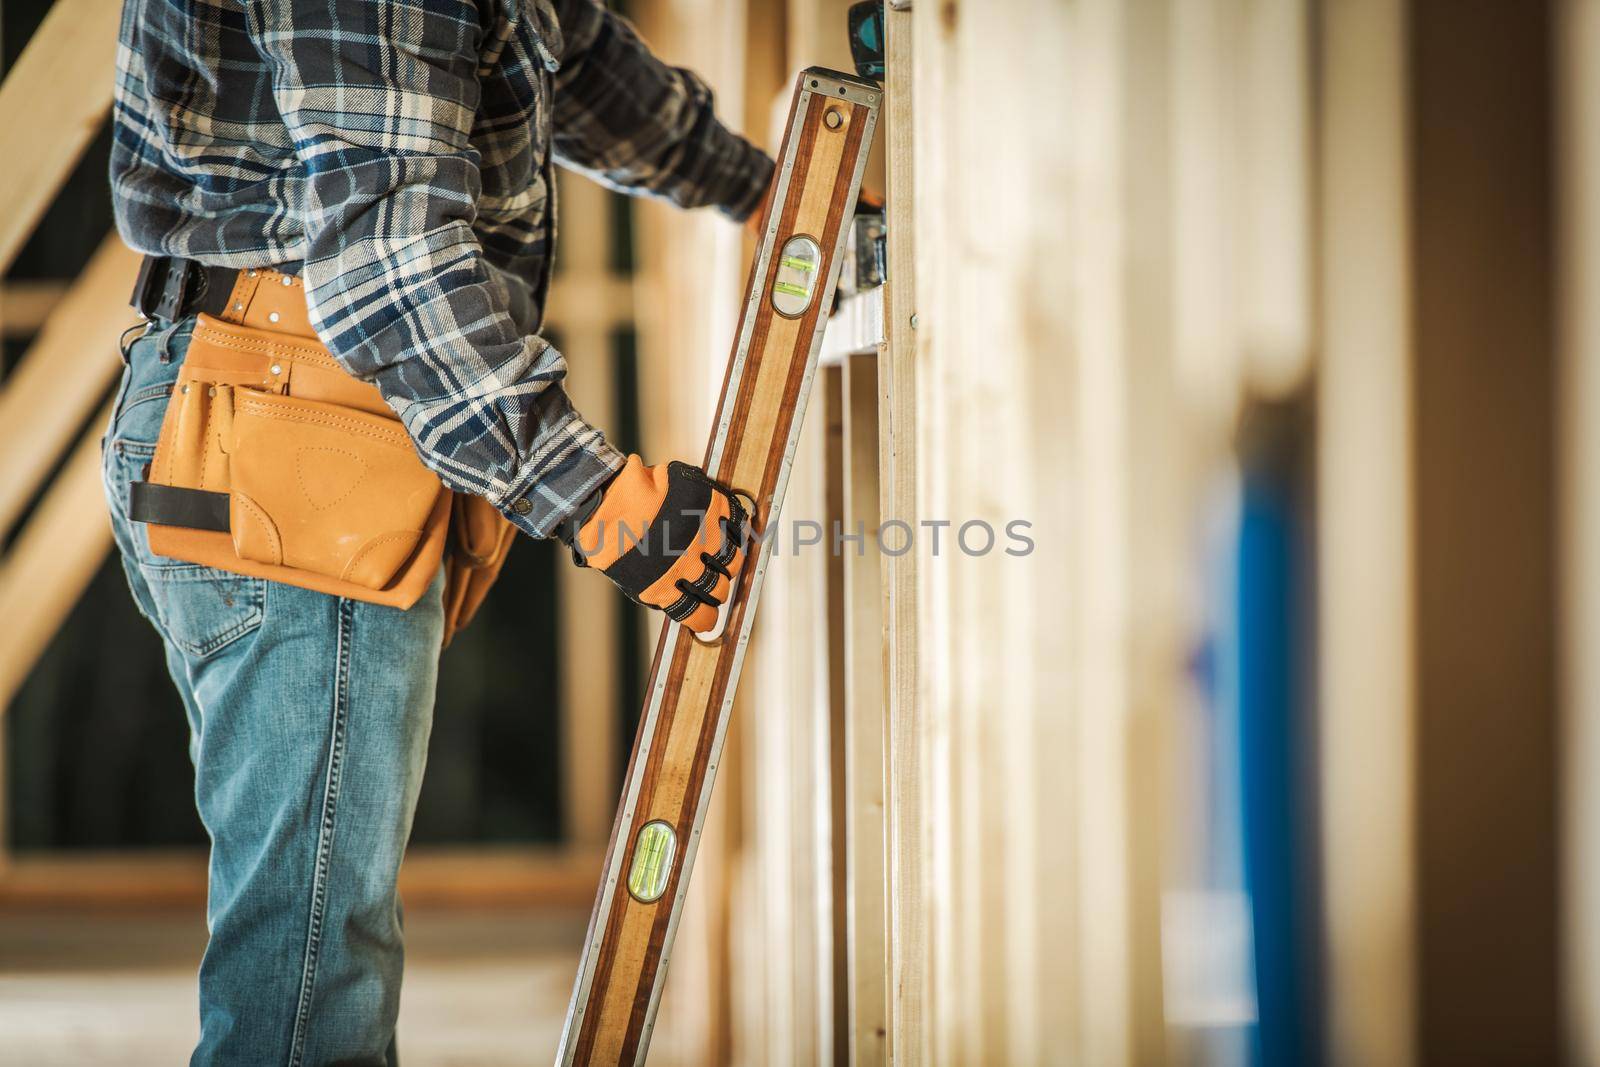 Contractor Worker Taking Spirit Level Tool to Make Sure the Wooden Frame Alignment is Correct. Construction Tools and Building Technologies. by welcomia